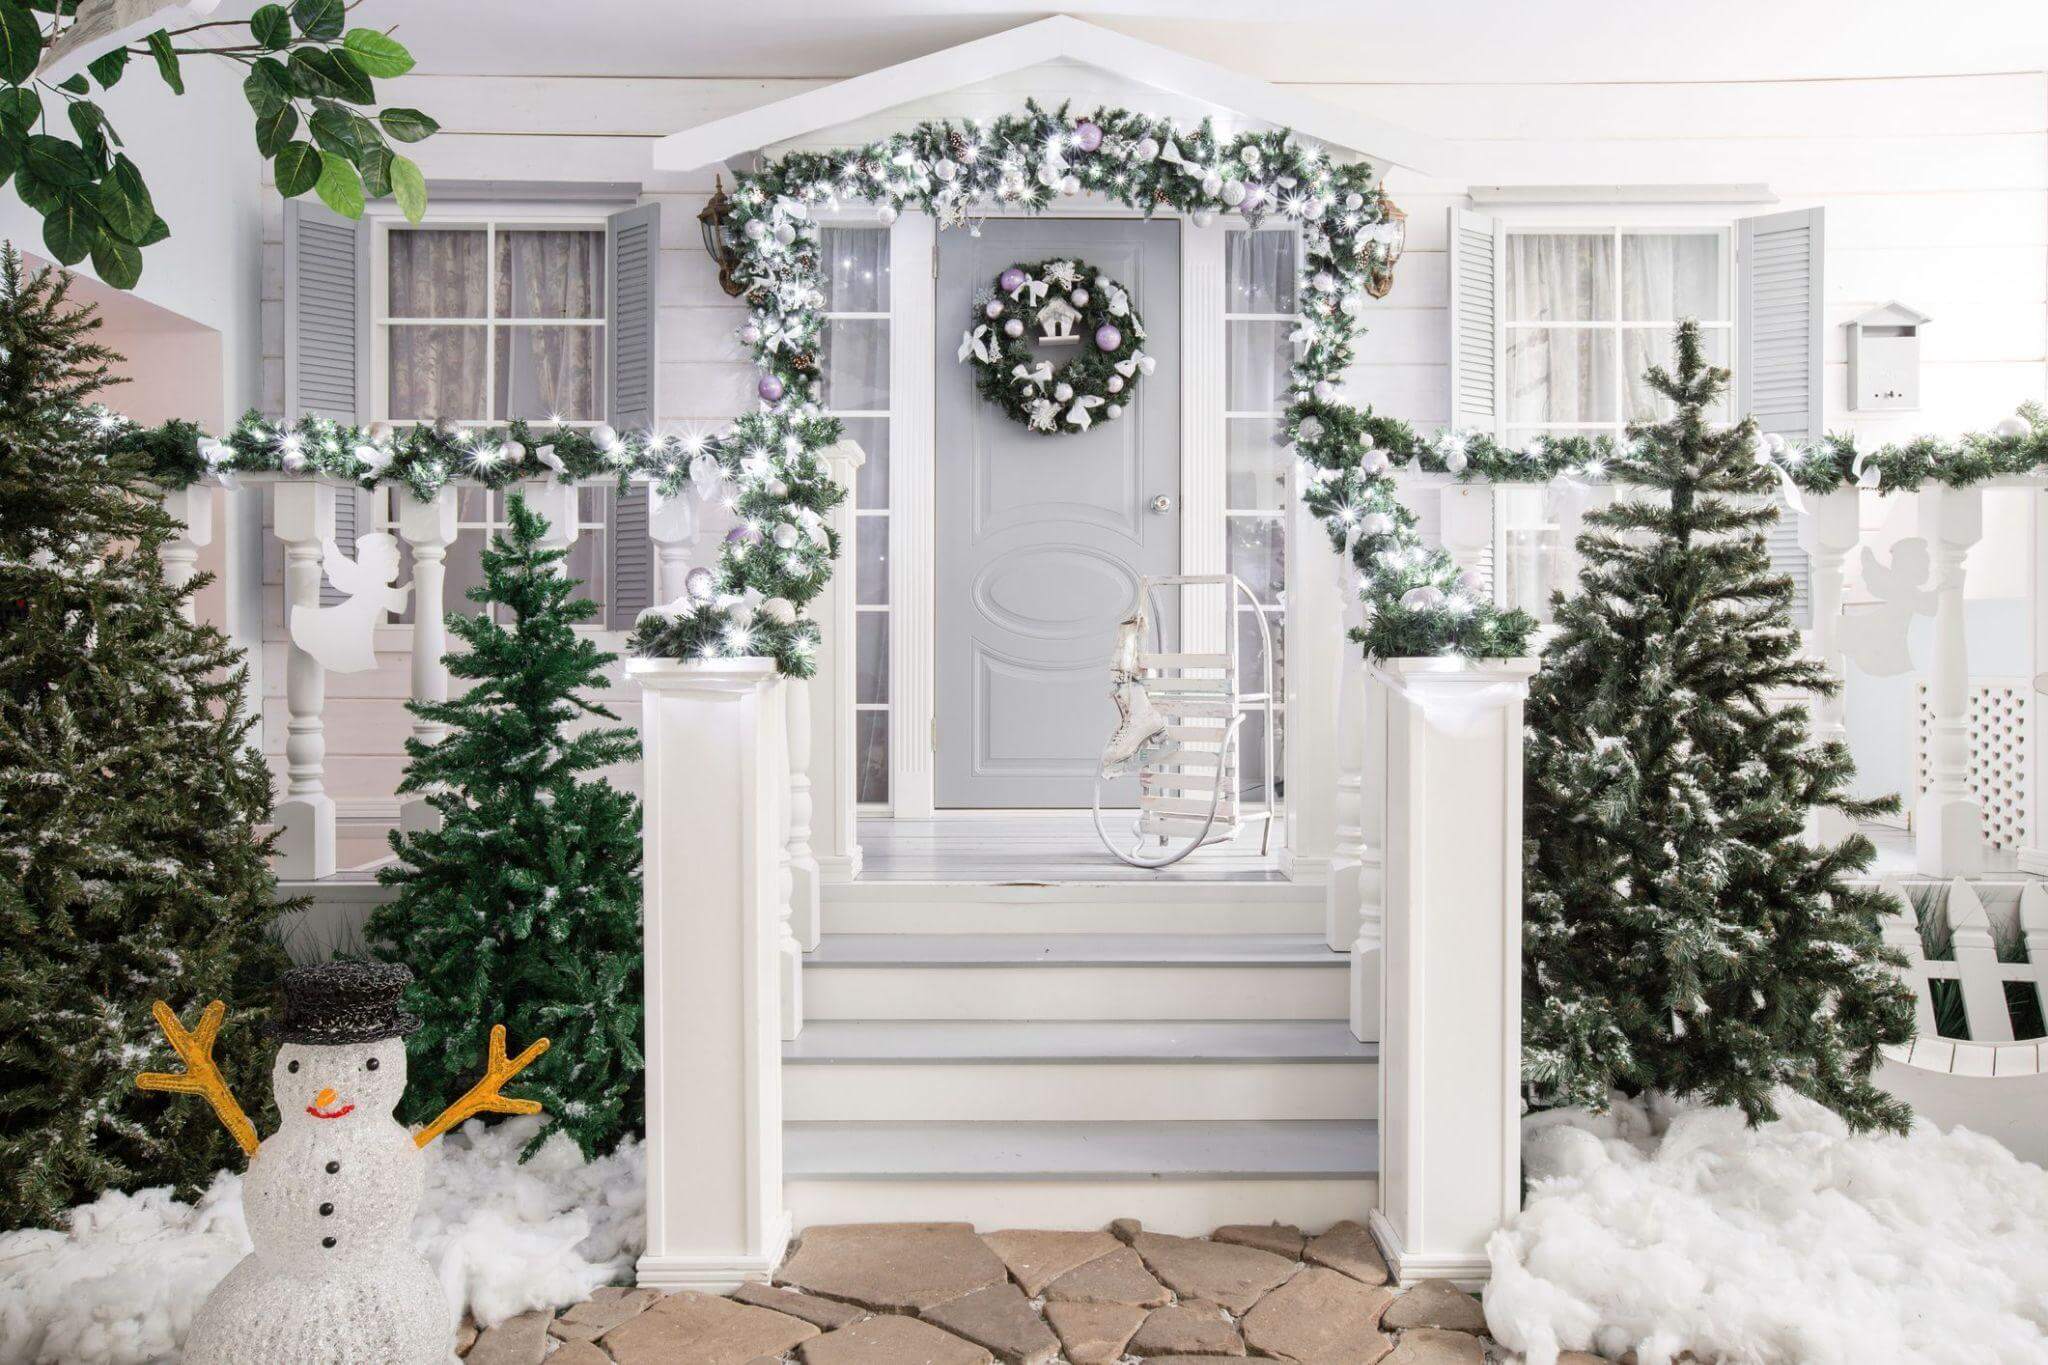 How to Decorate Home Door on Christmas Festival